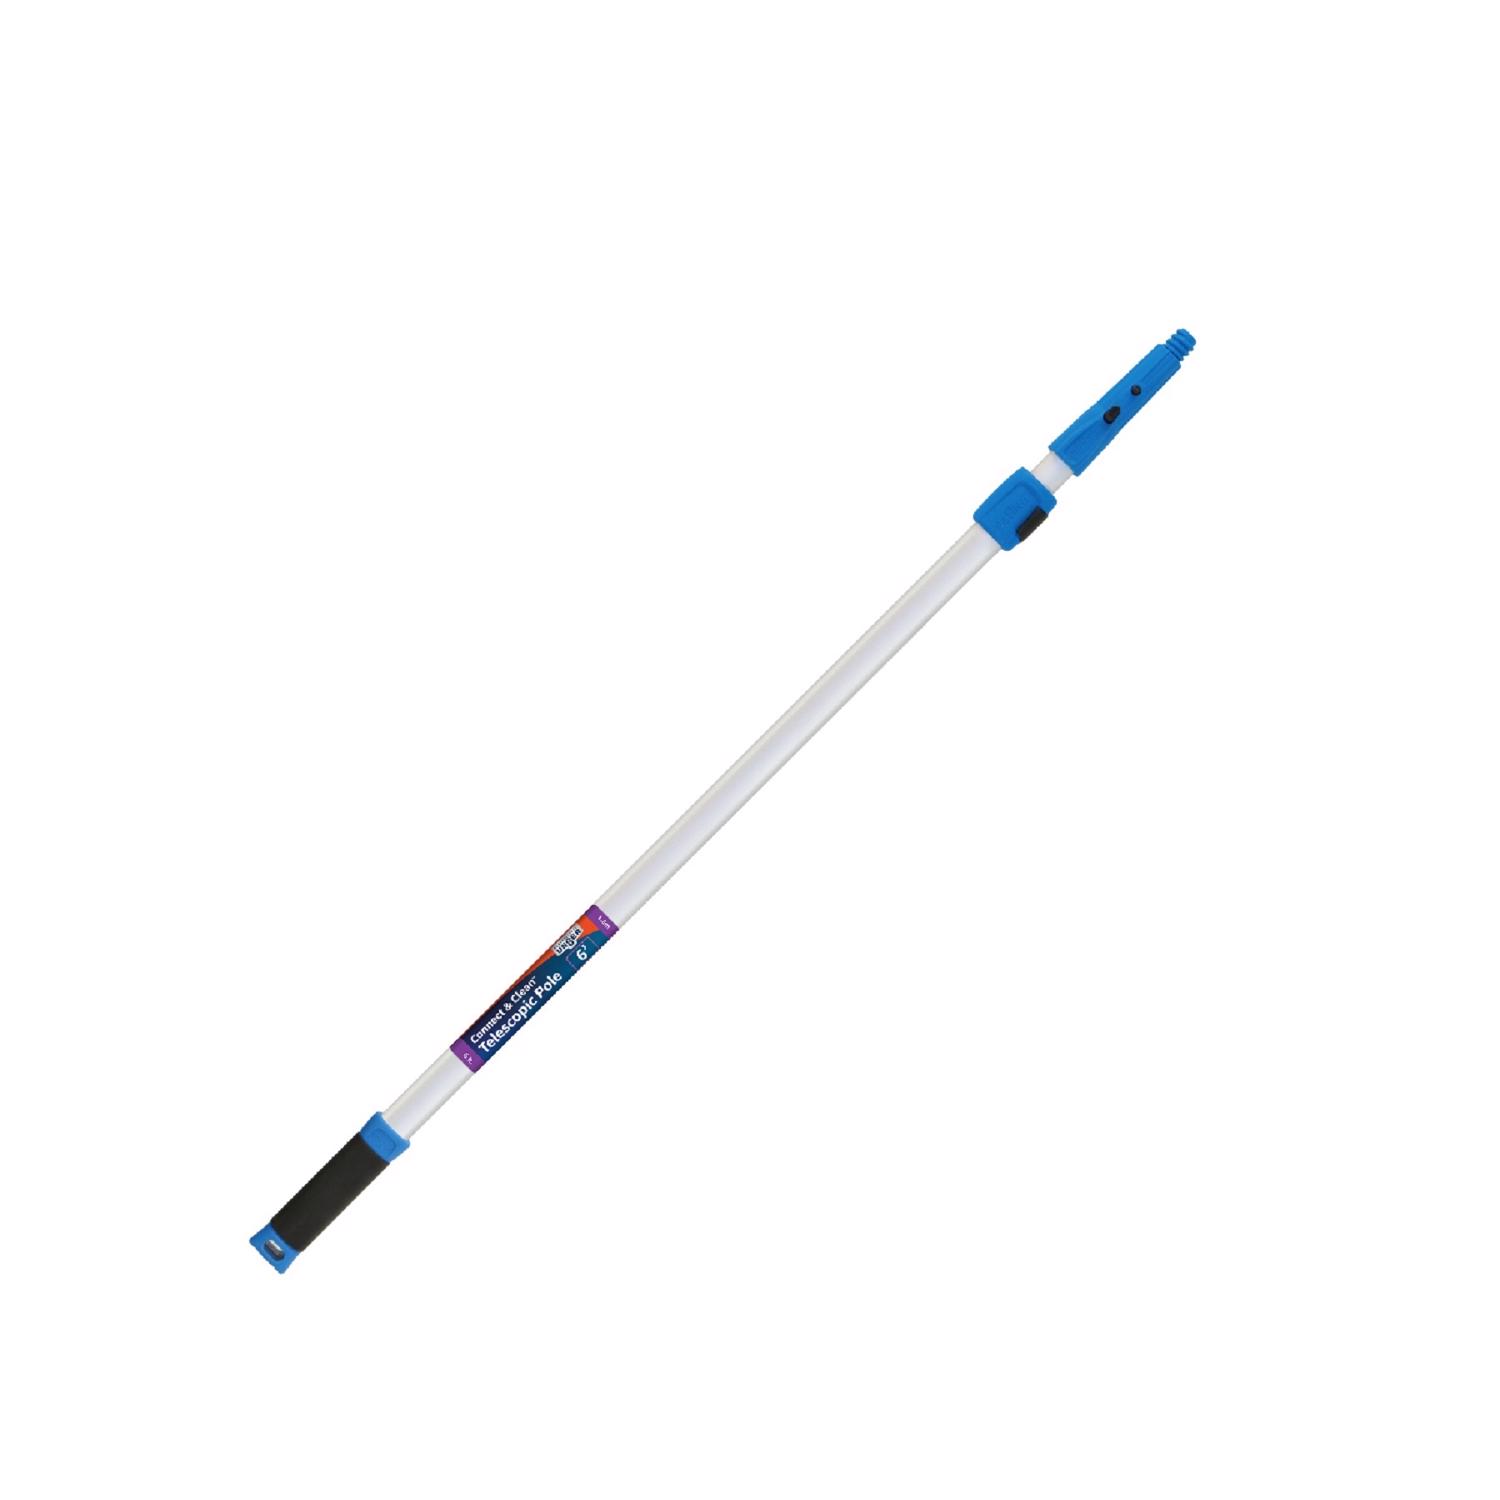 7-24 ft Telescopic Extension Pole, Insecticide Sprayer